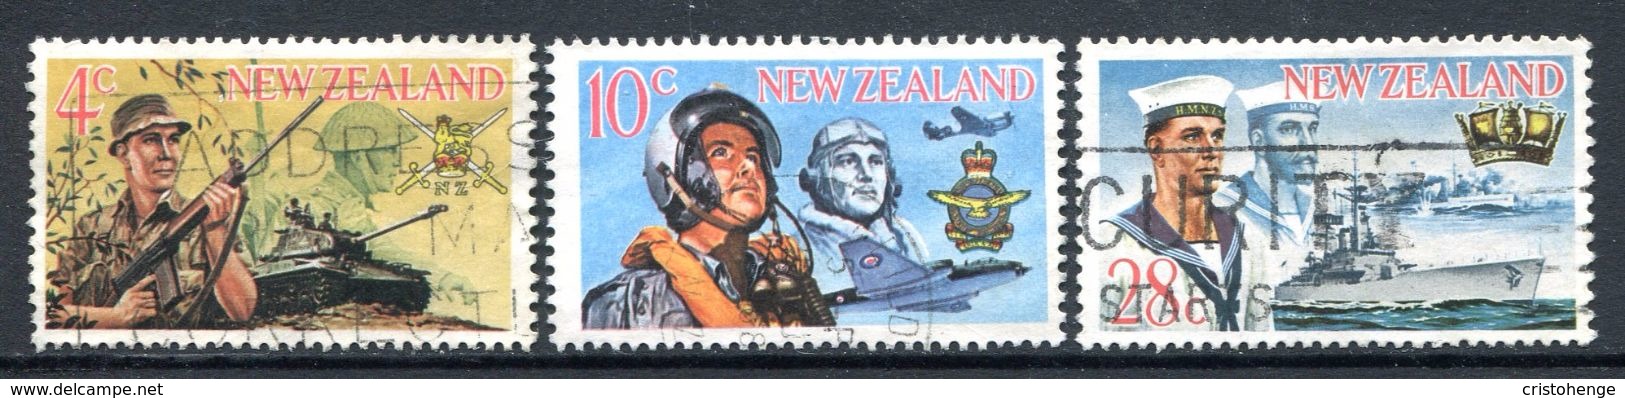 New Zealand 1968 New Zealand Armed Forces Set Used (SG 884-886) - Gebraucht